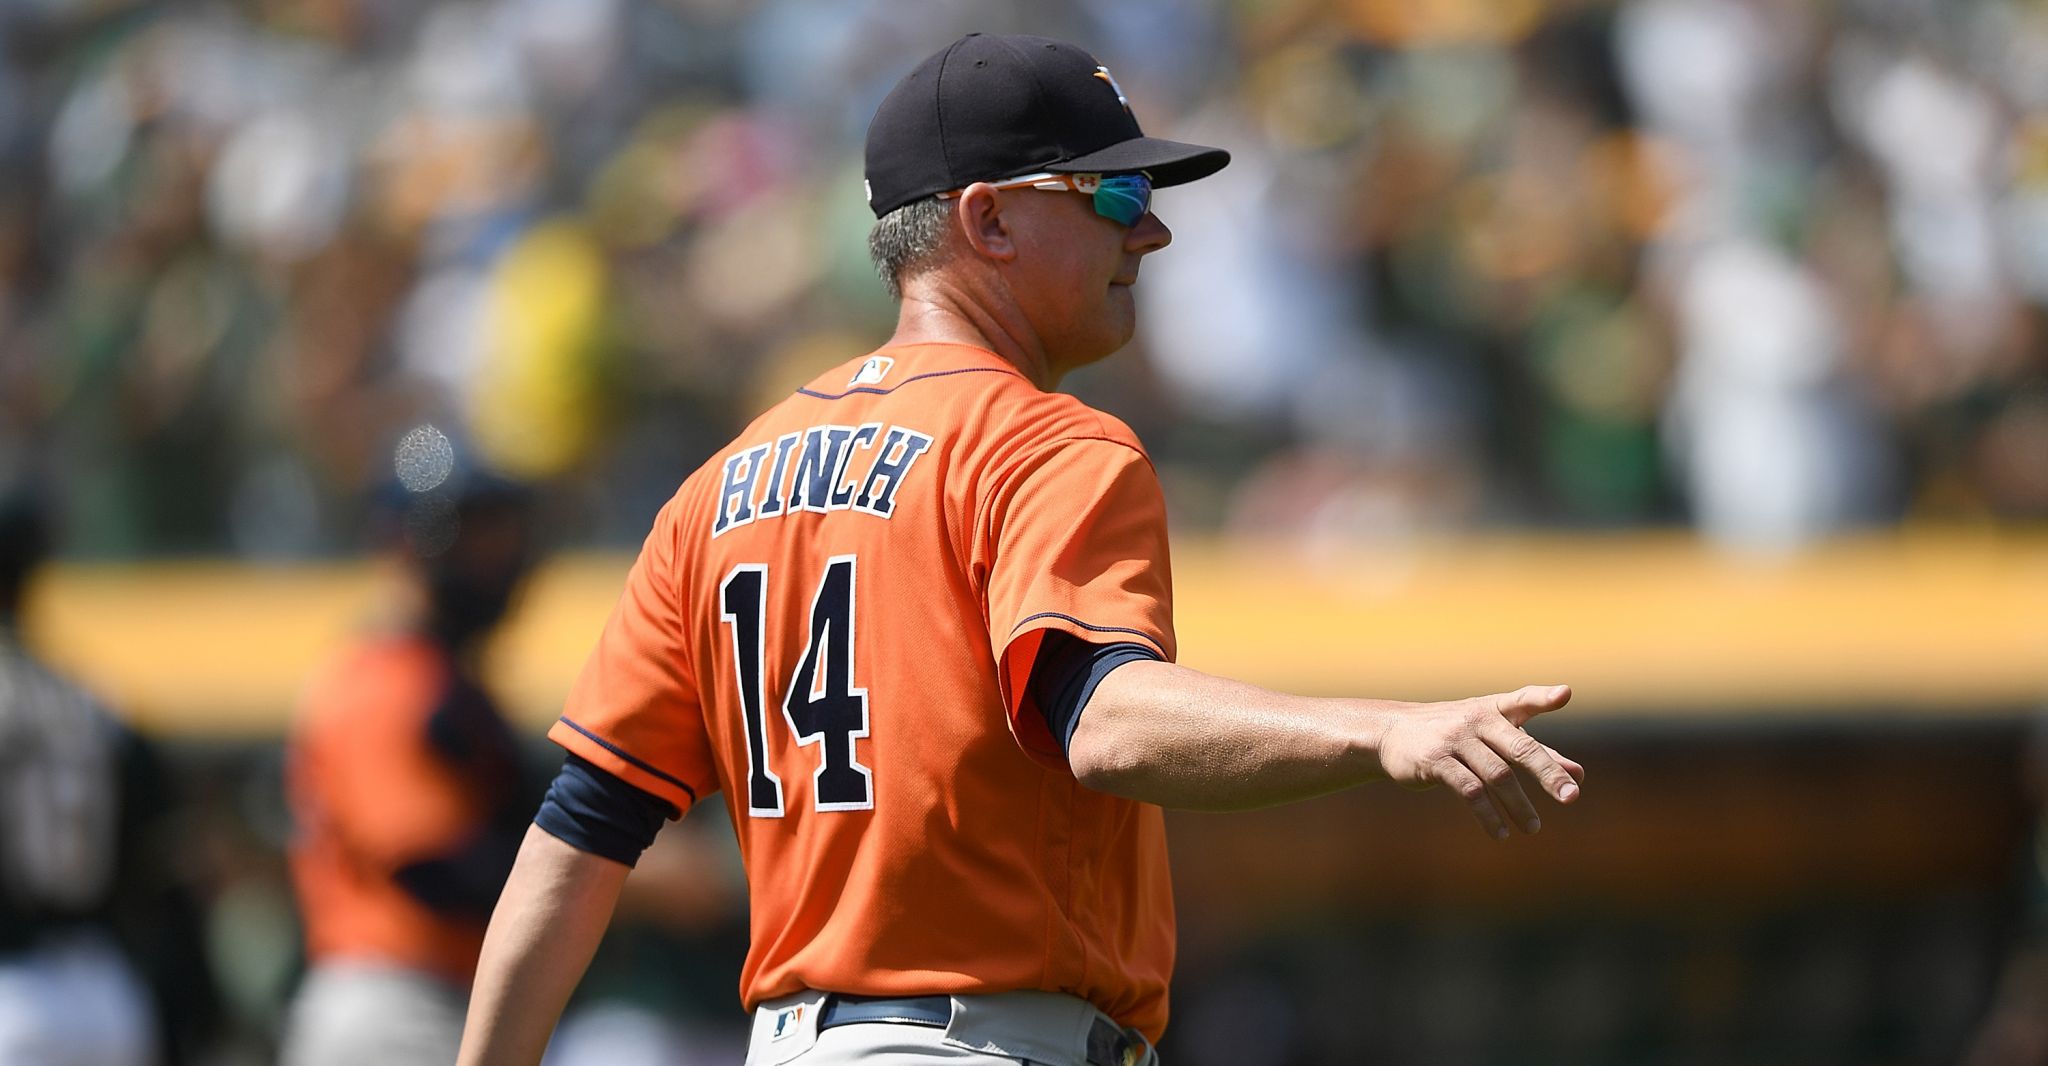 Astros manager A.J. Hinch jokingly dons 